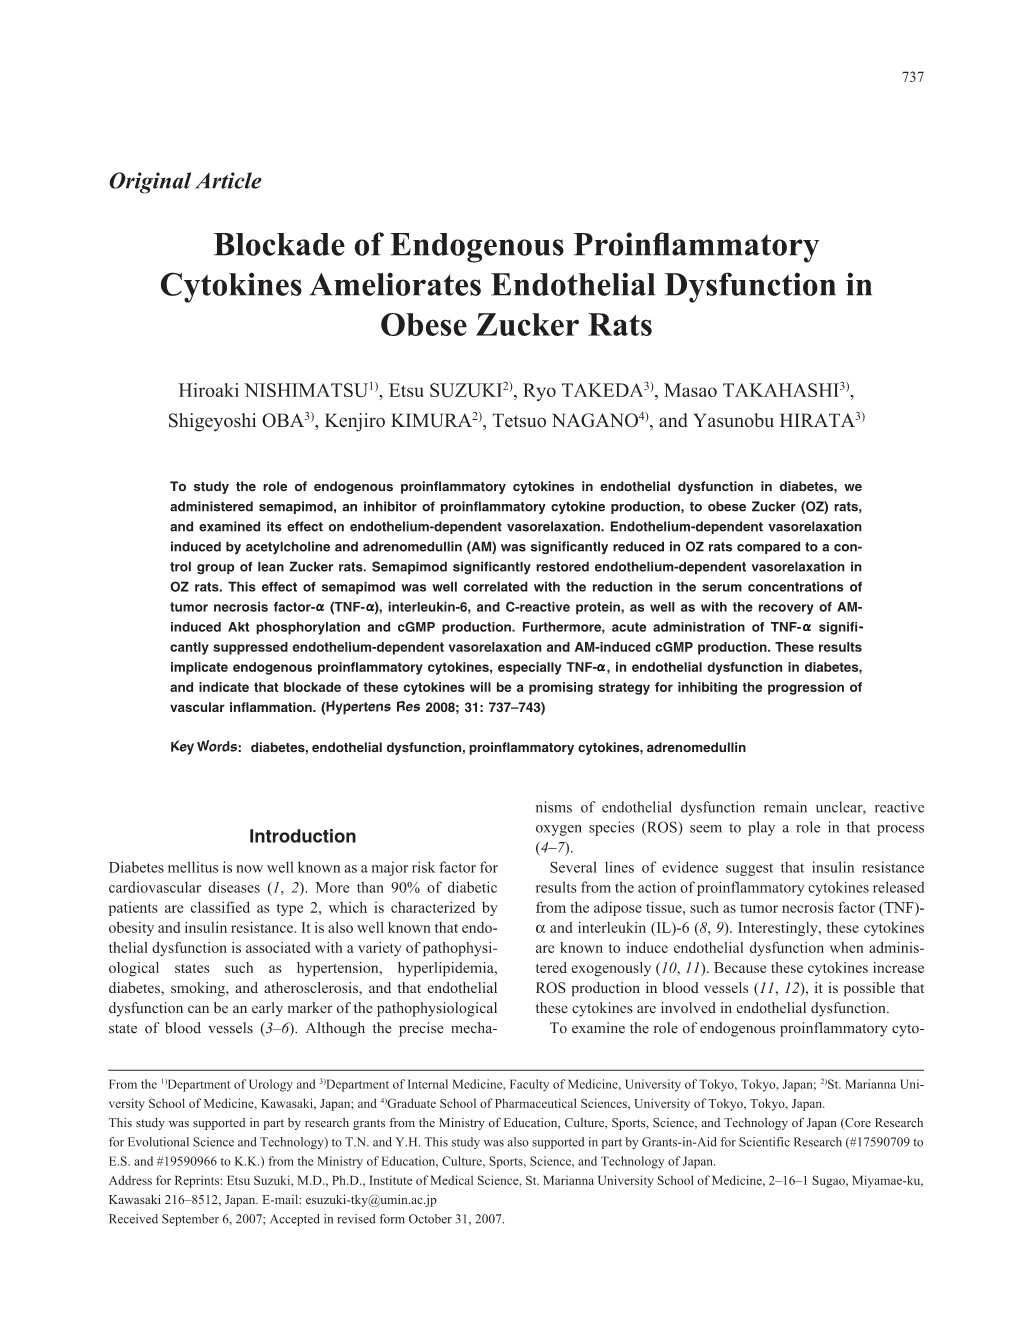 Blockade of Endogenous Proinflammatory Cytokines Ameliorates Endothelial Dysfunction in Obese Zucker Rats